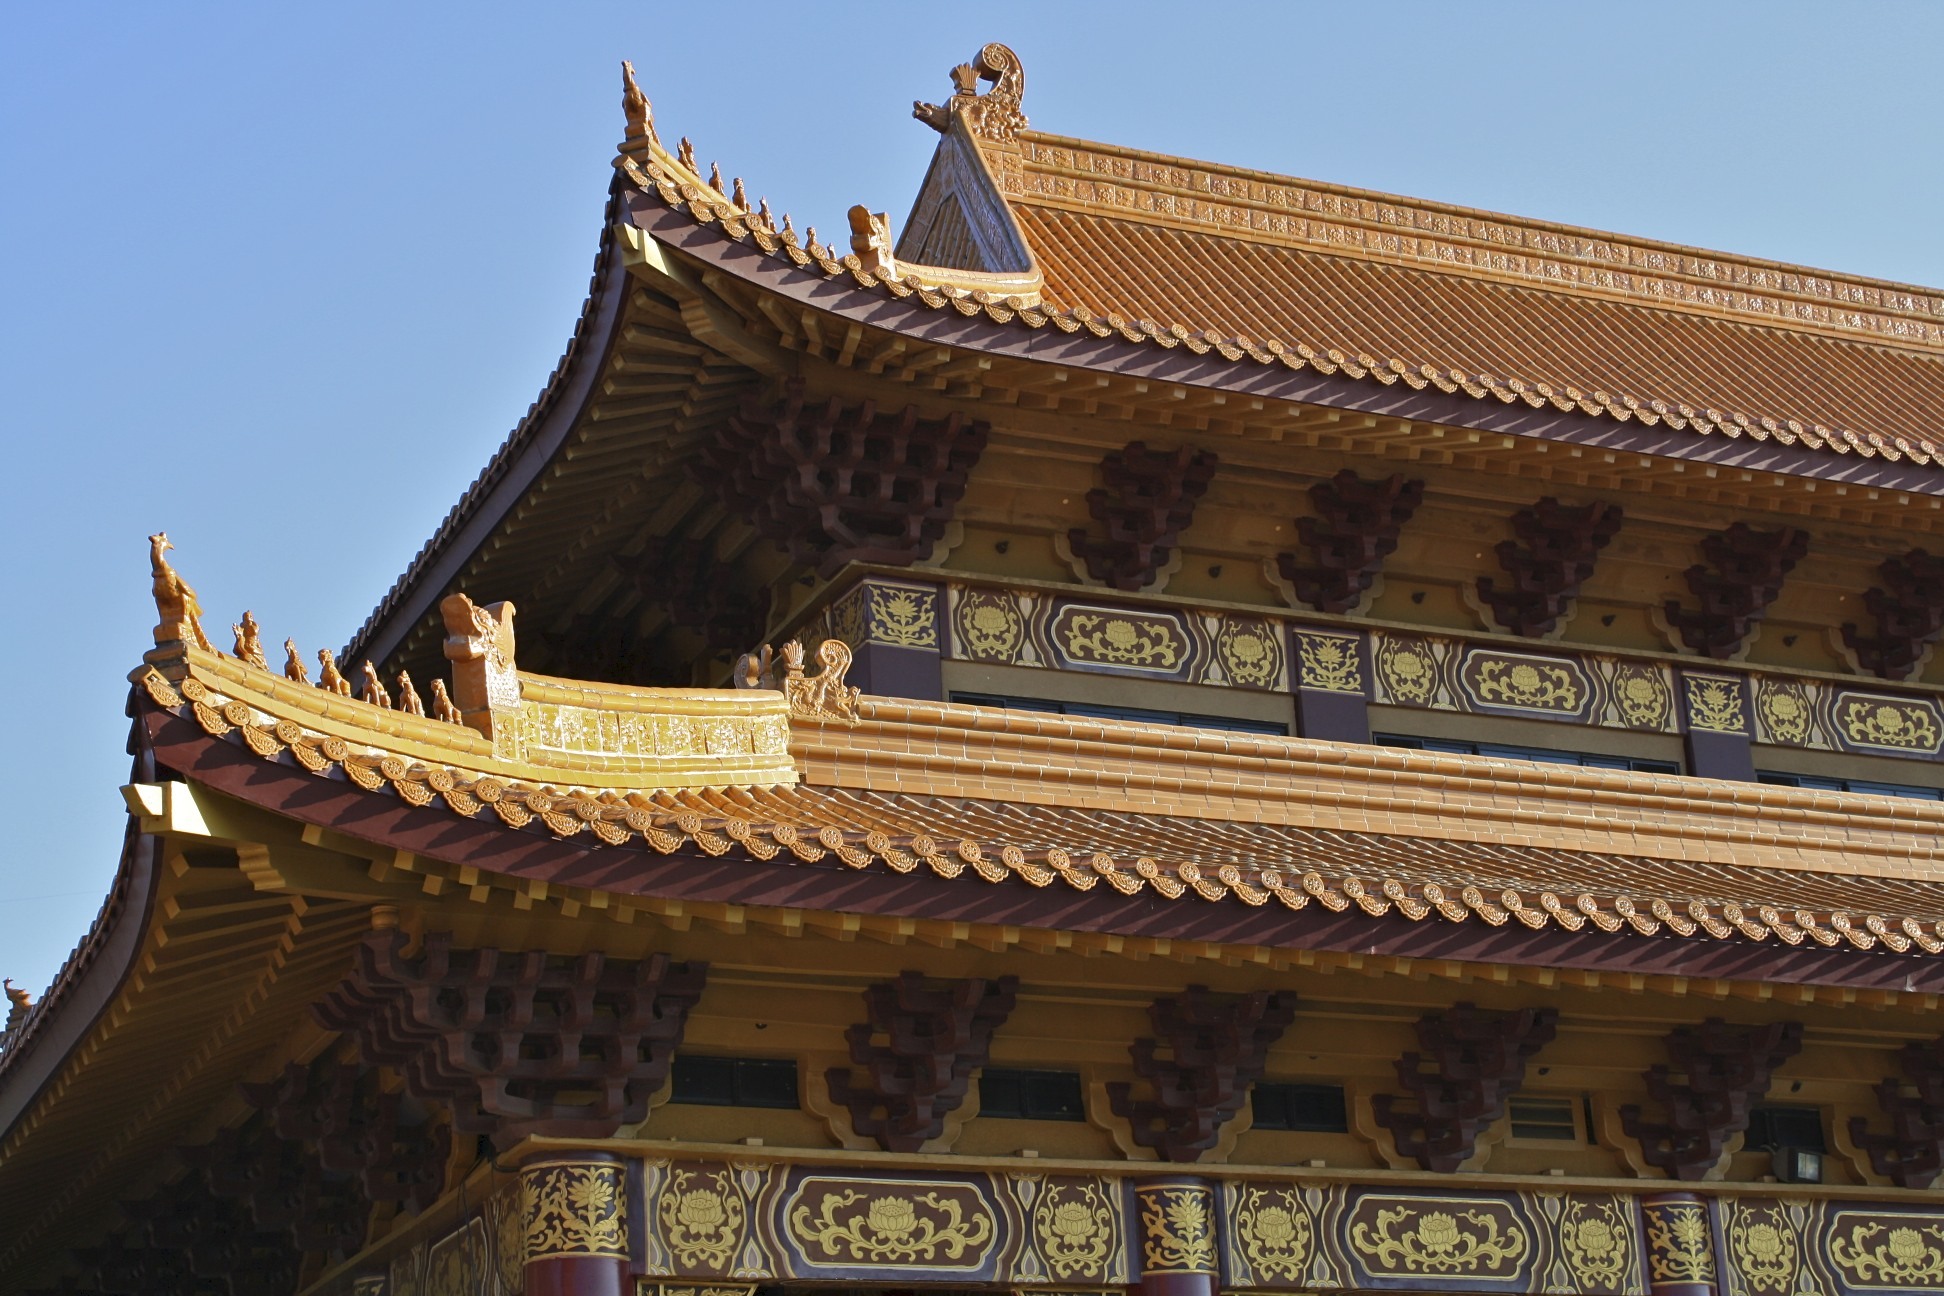 hsi lai temple roof detail